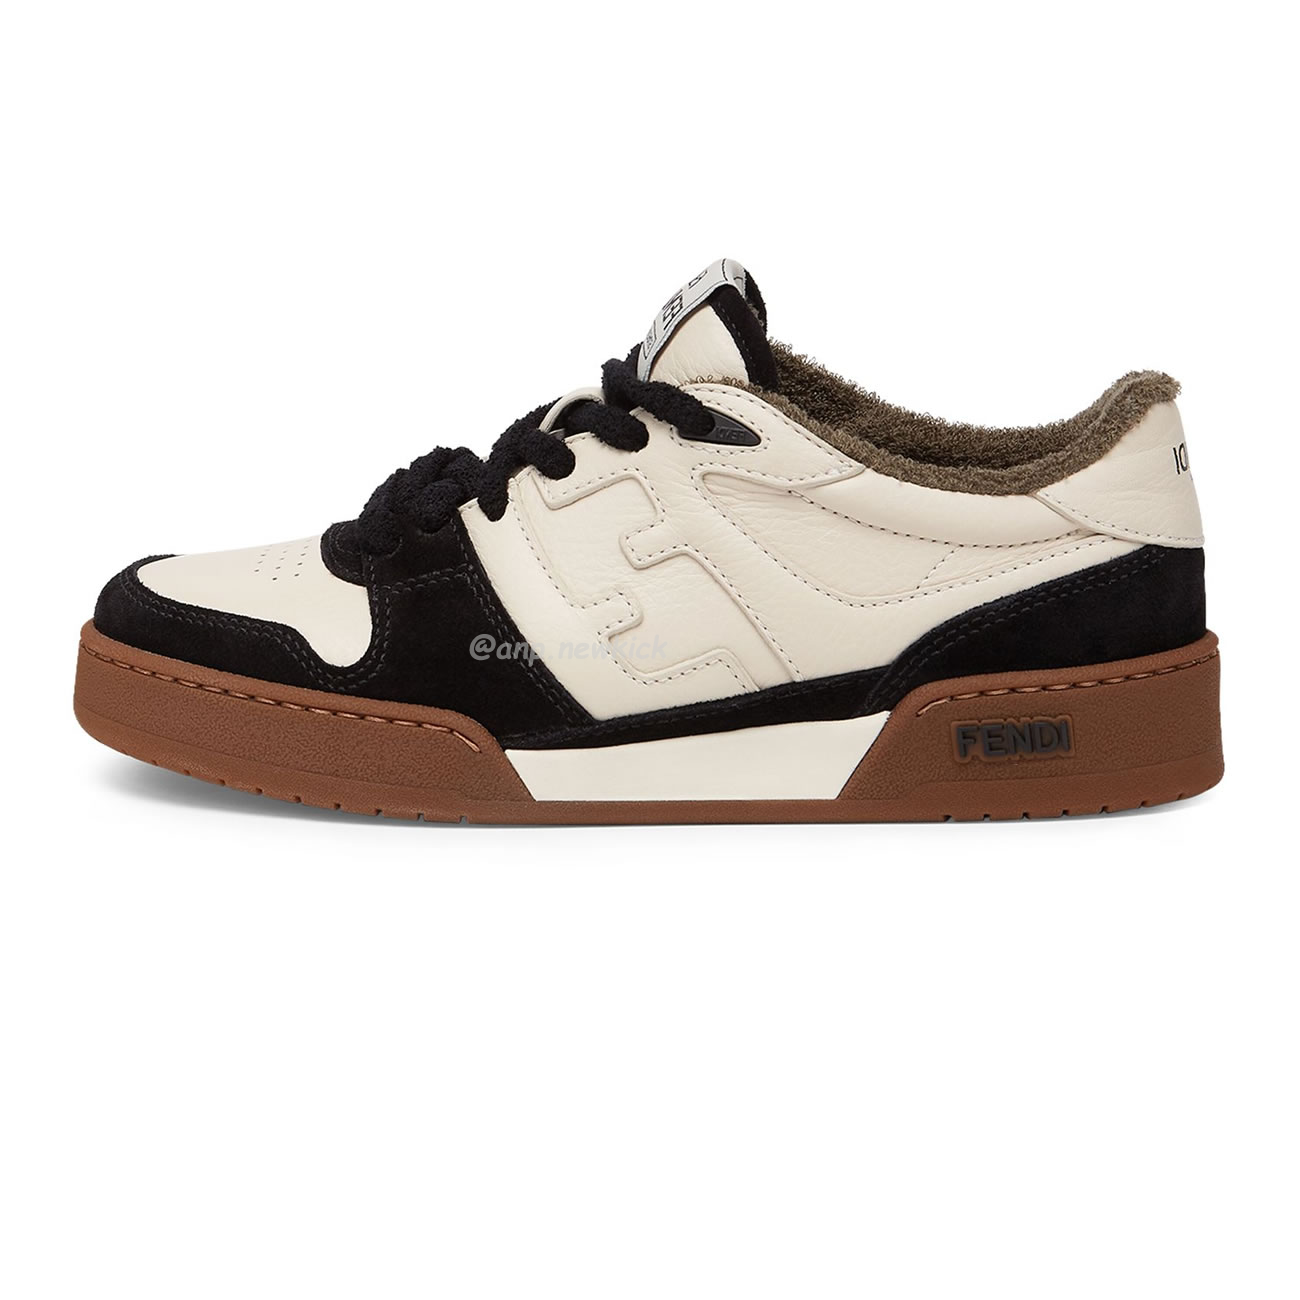 Fendi Match Cream Black White Suede And Leather Low Top Sneakers (13) - newkick.org